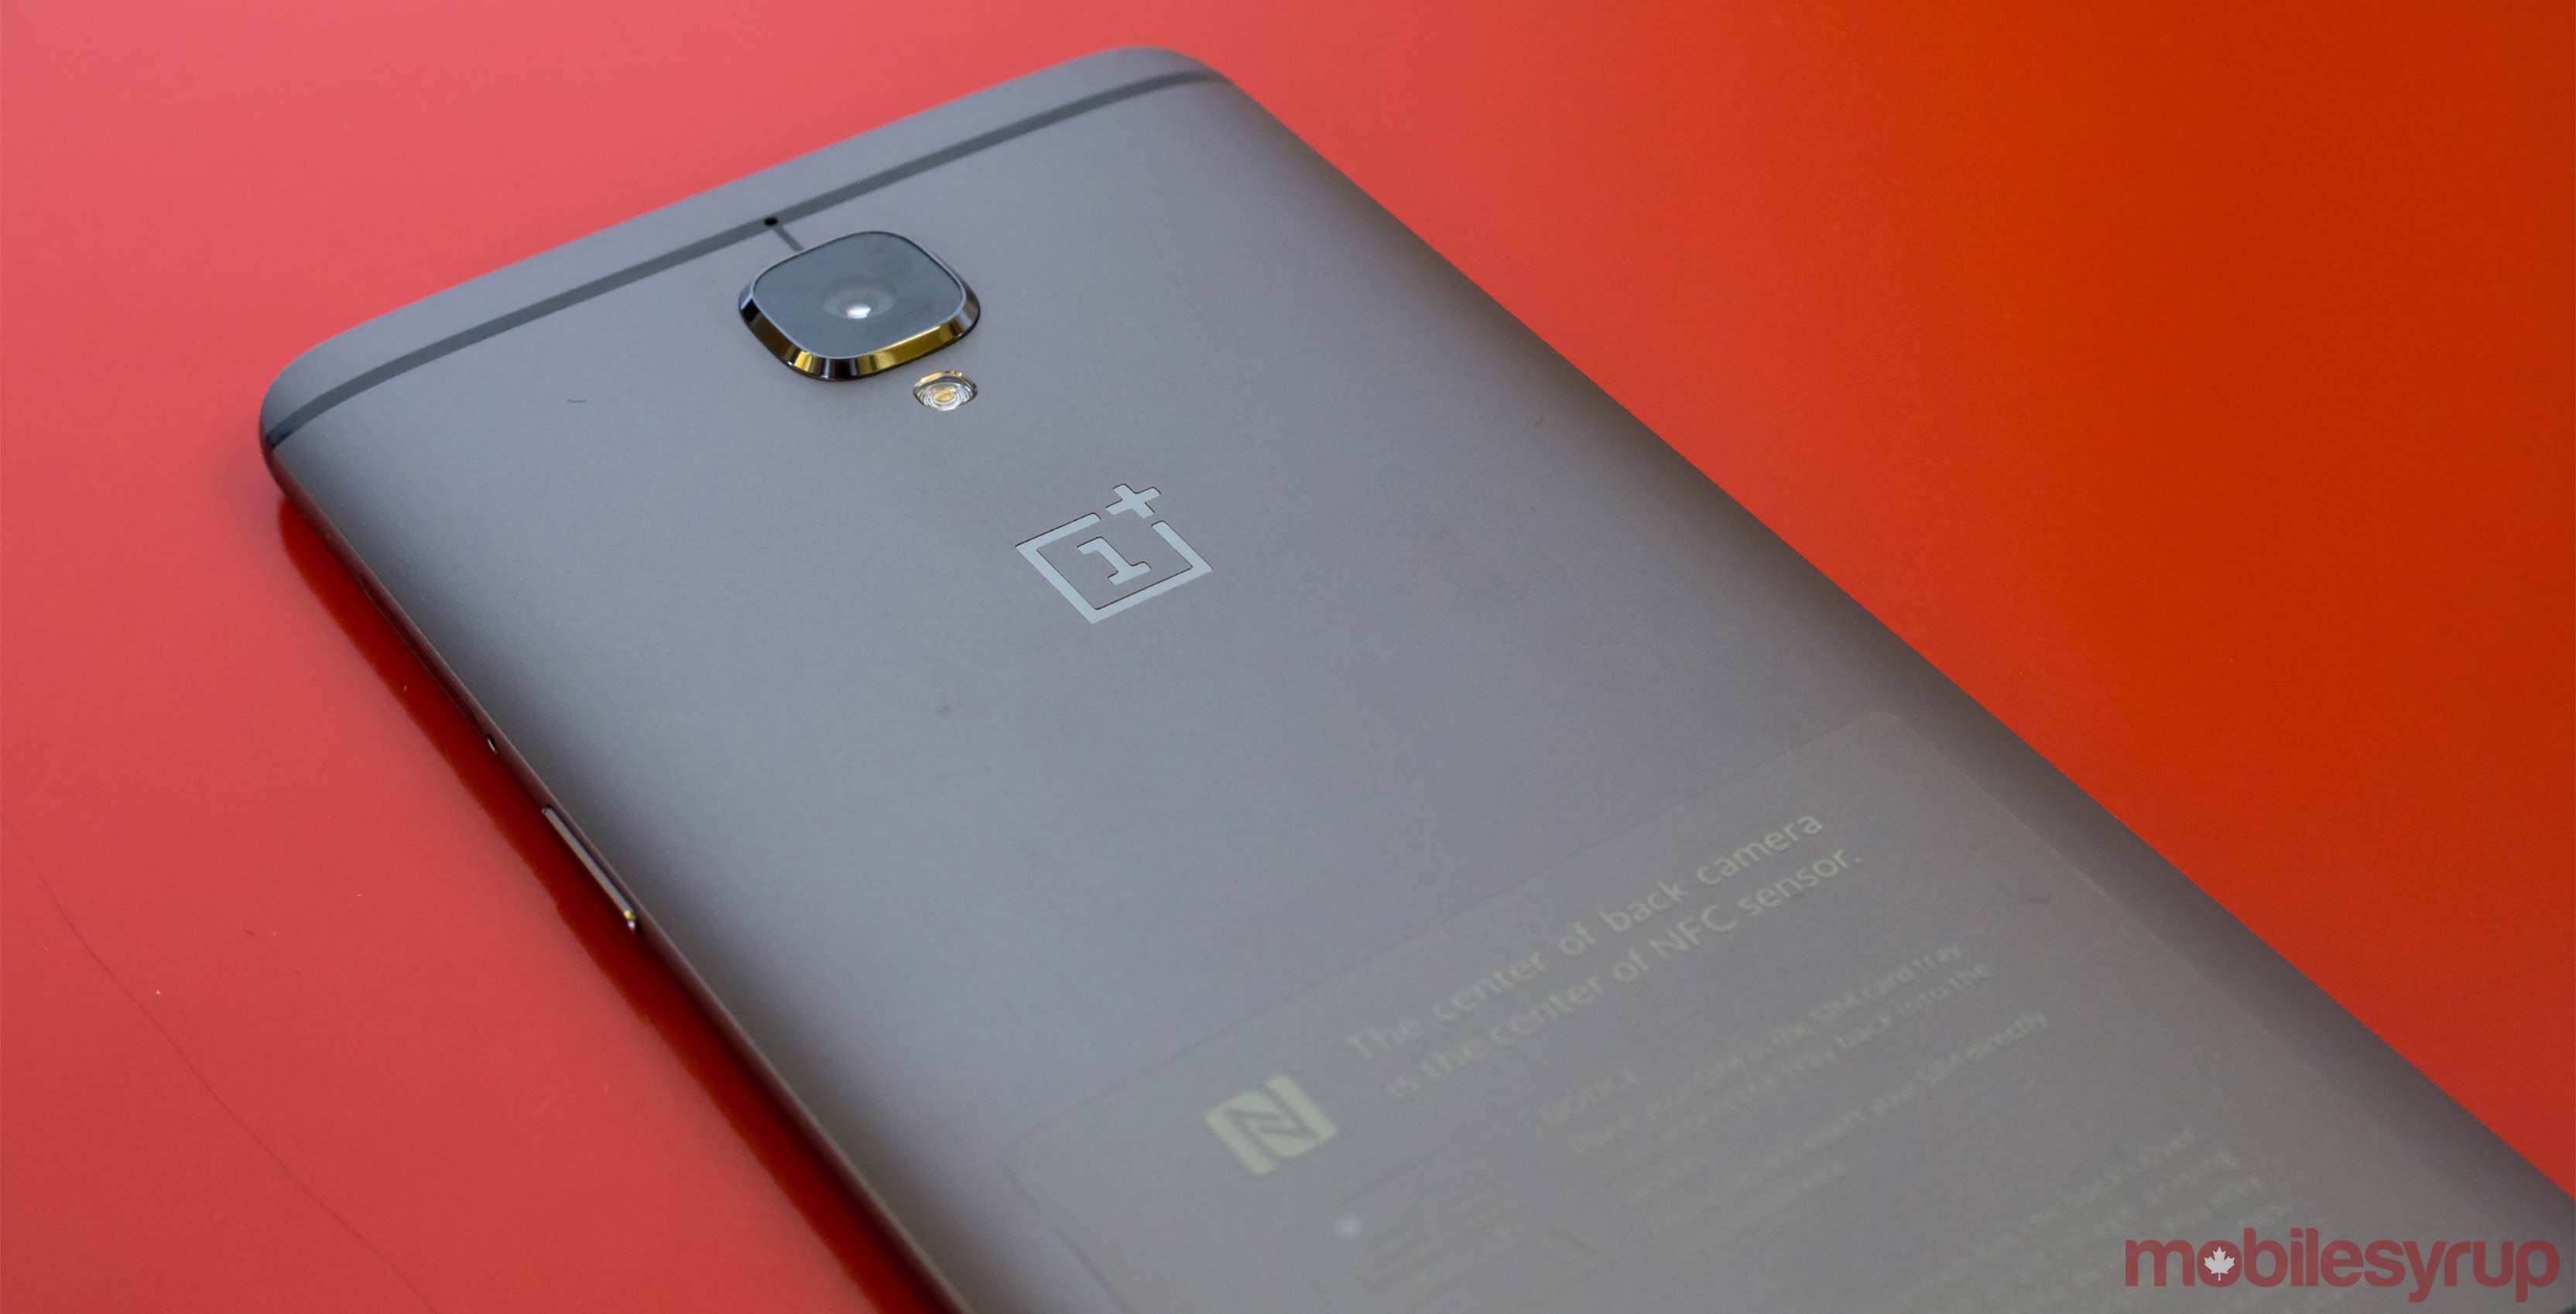 OnePlus android smartphone